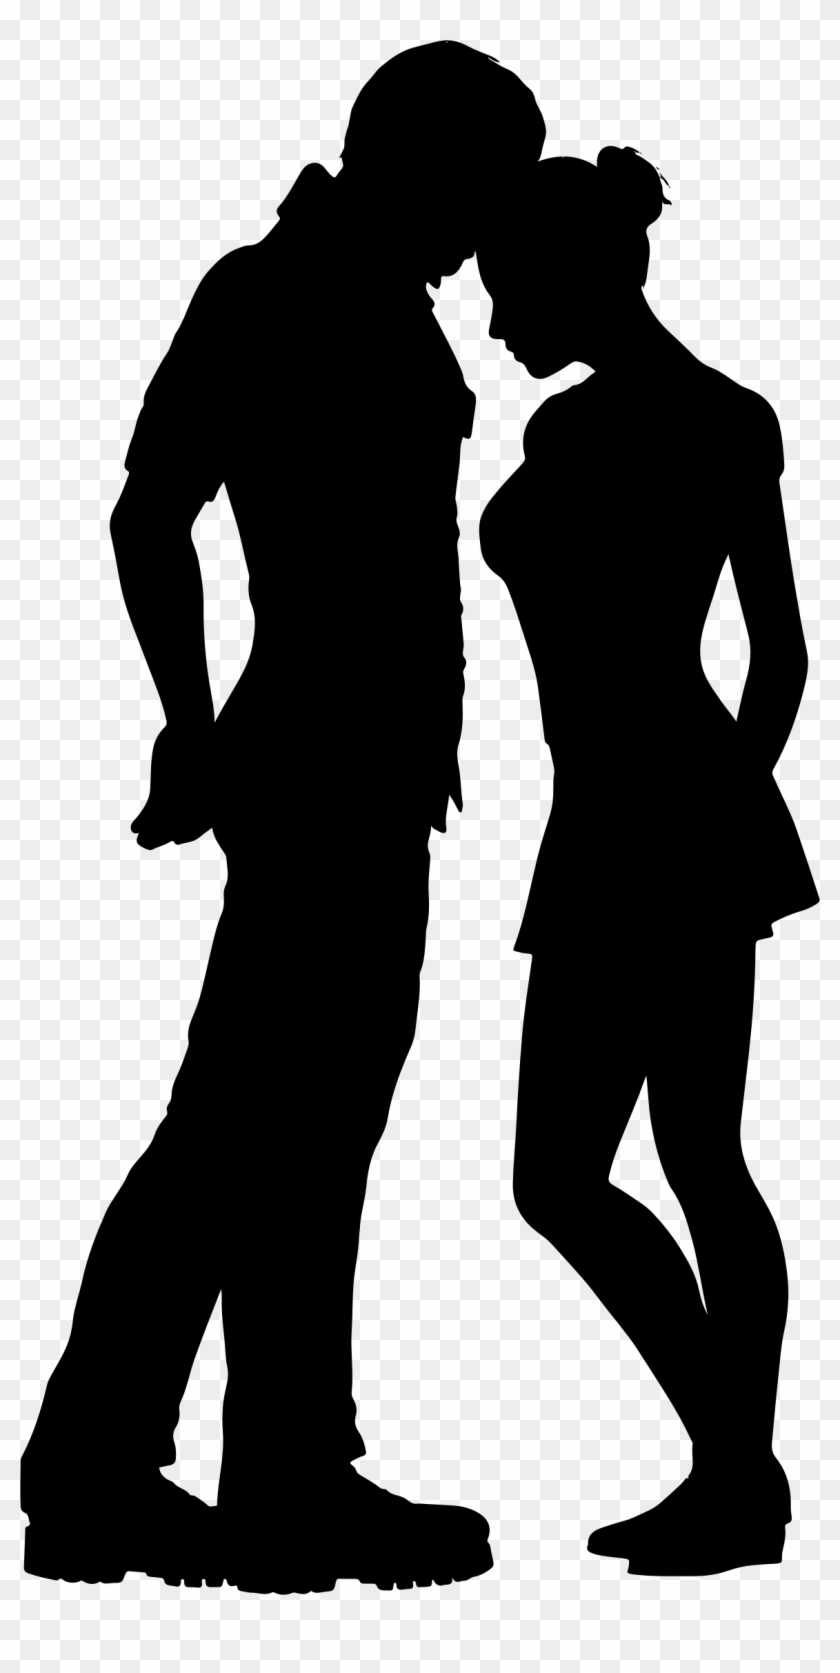 Clipart Girl And Boy Silhouette Png Free Transparent Png Clipart Images Download